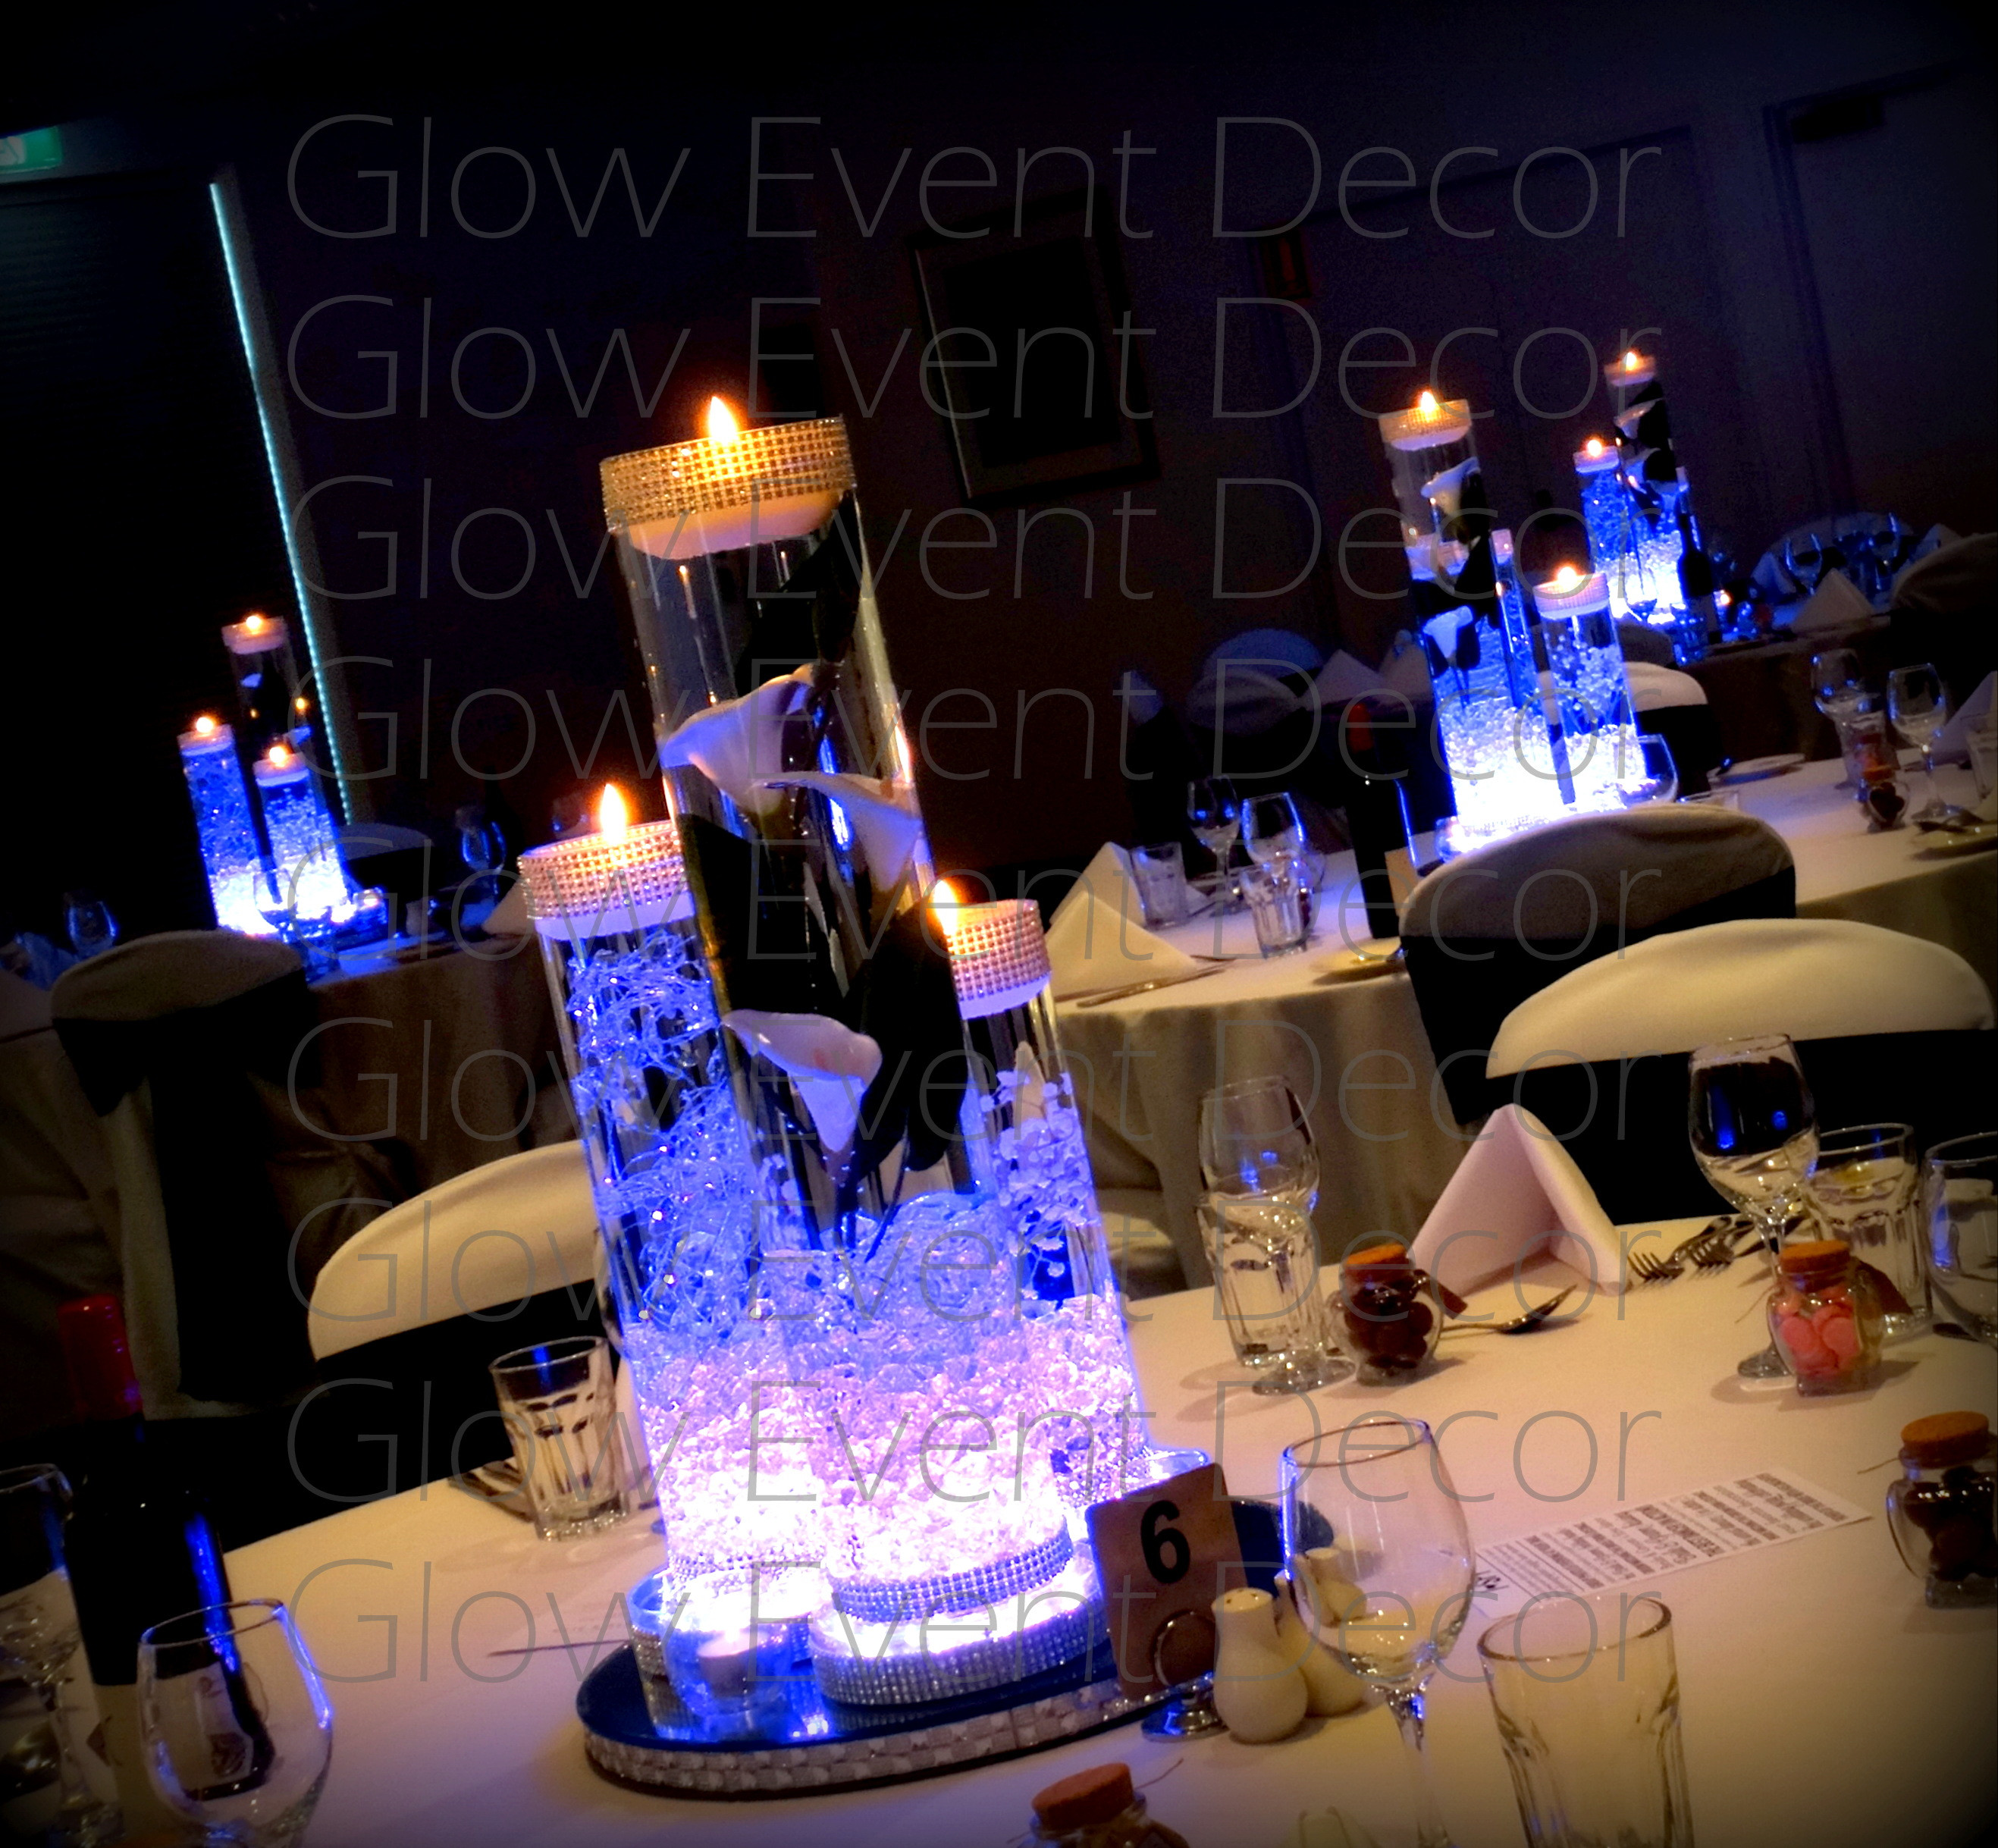 25 Elegant Floating Candle Flower Vases 2024 free download floating candle flower vases of led orchid cylinder vase glow event decor throughout cylinder vase trio with led light bases and floating candles for hire glow event decor adelaide